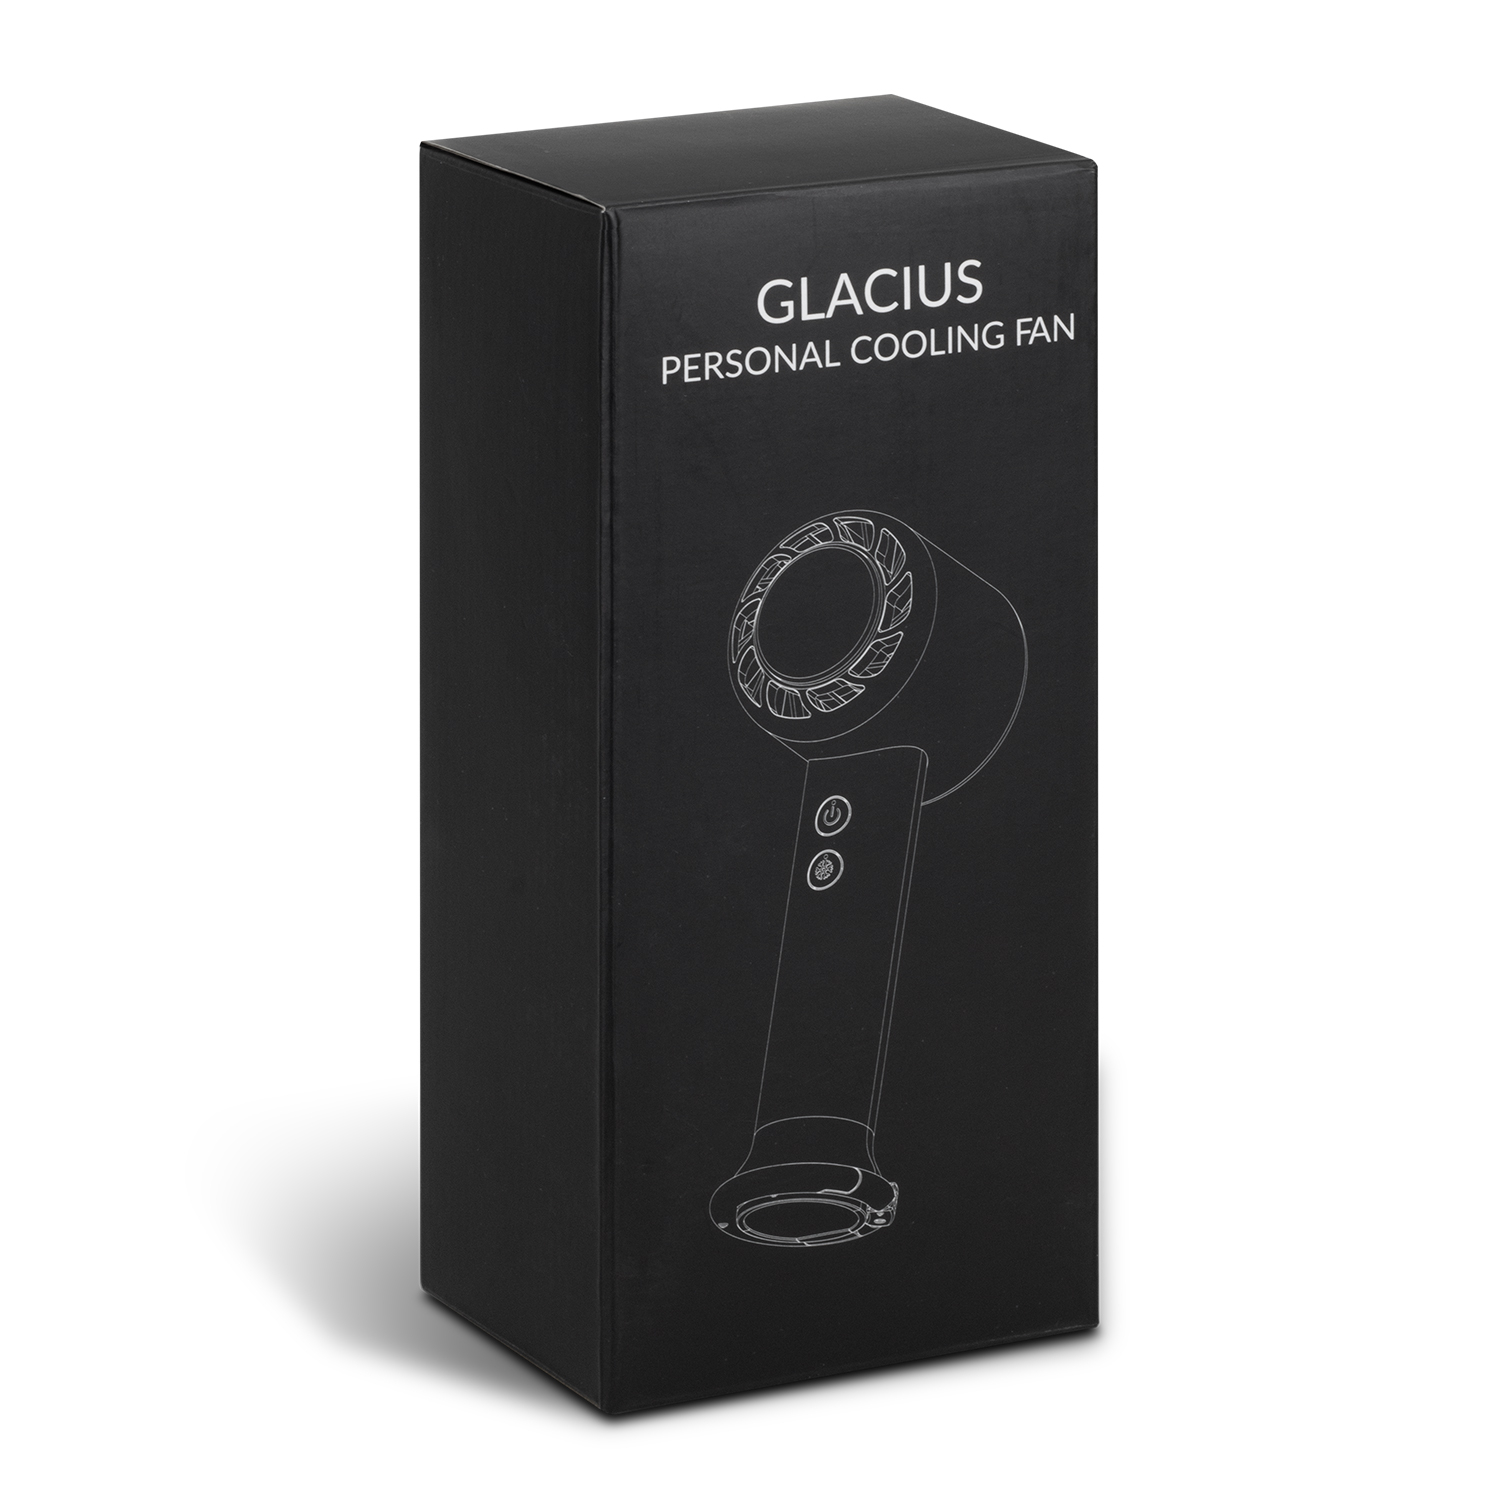 Glacius Personal Cooling Fan 126260 | Gift Box